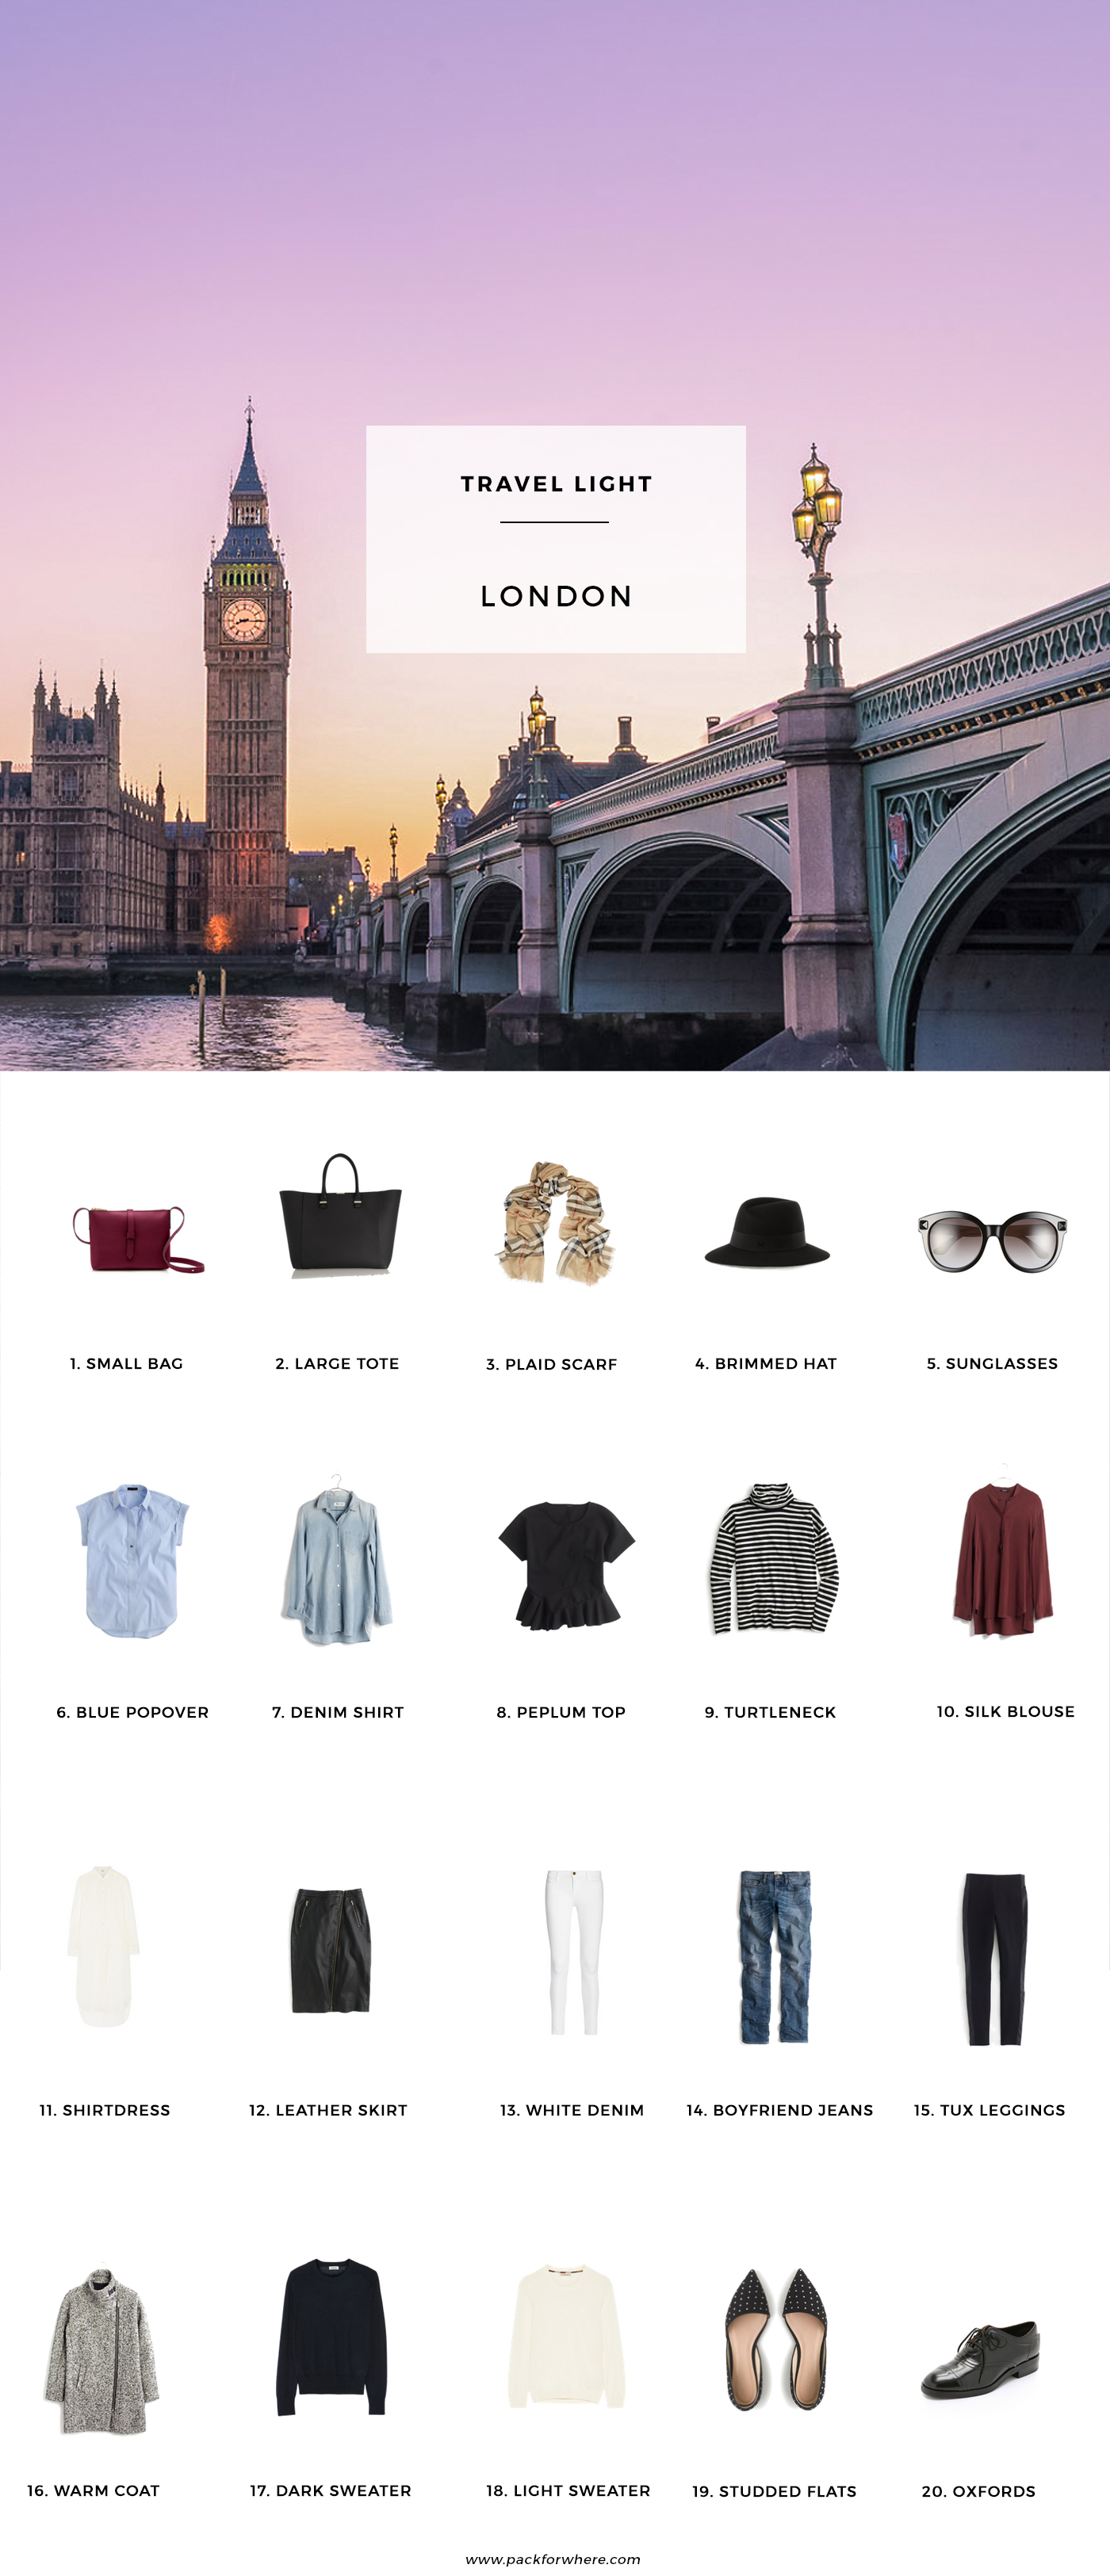 London Packing List, 20 items, 10+ outfits, 1 carryon #travellight #minimalism #capsulecloset